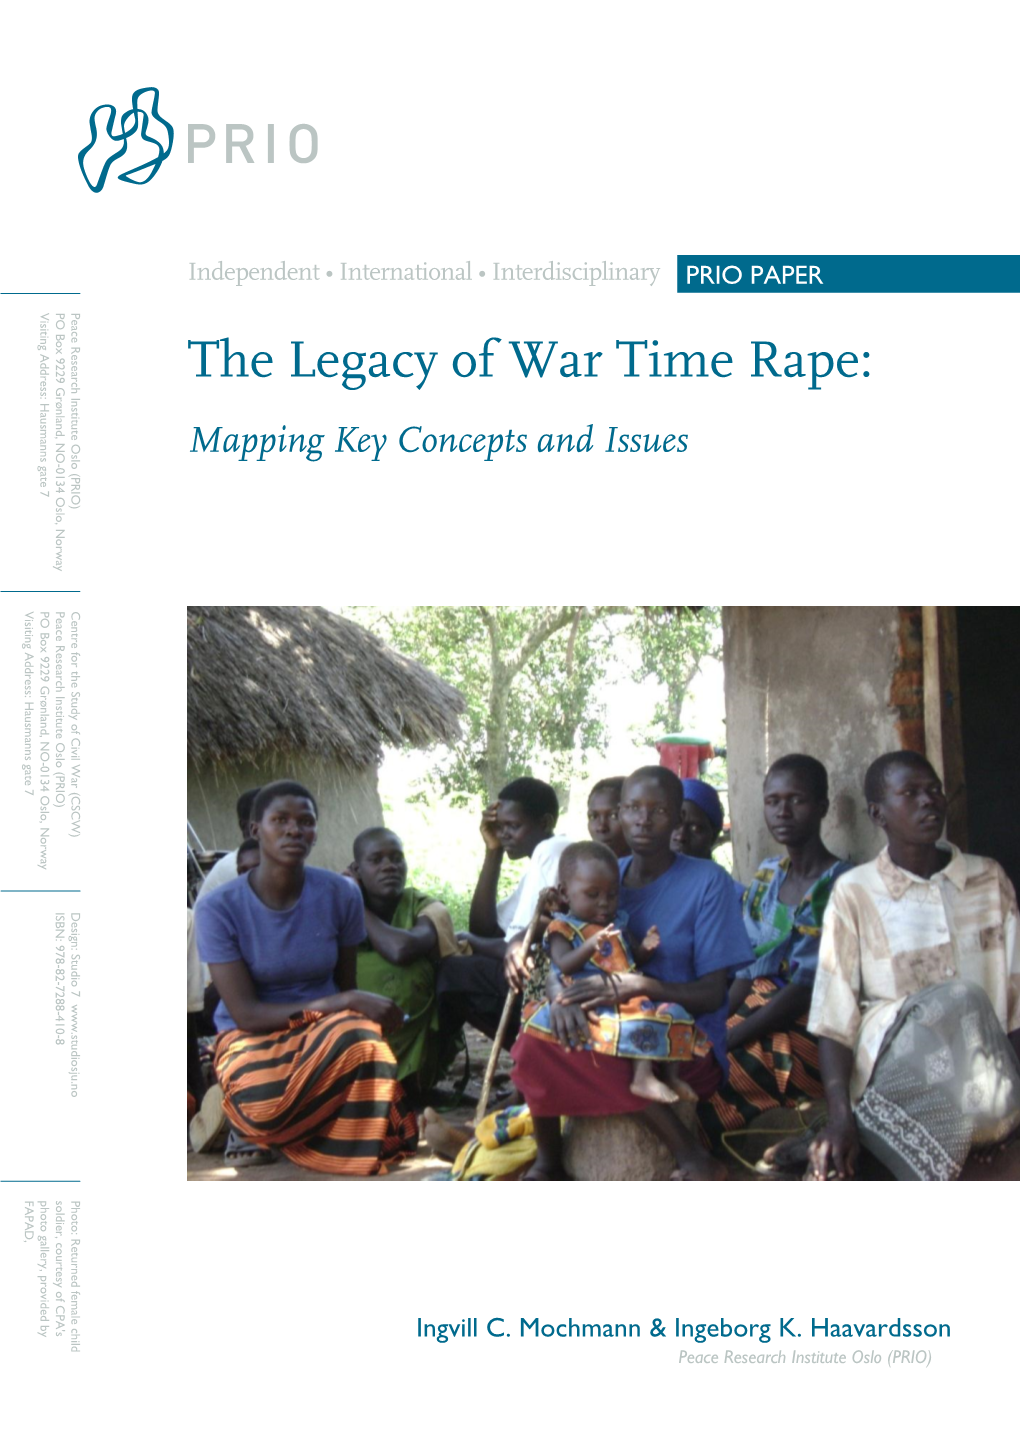 The Legacy of War Time Rape: the Legacy of War Time Rape: Mapping